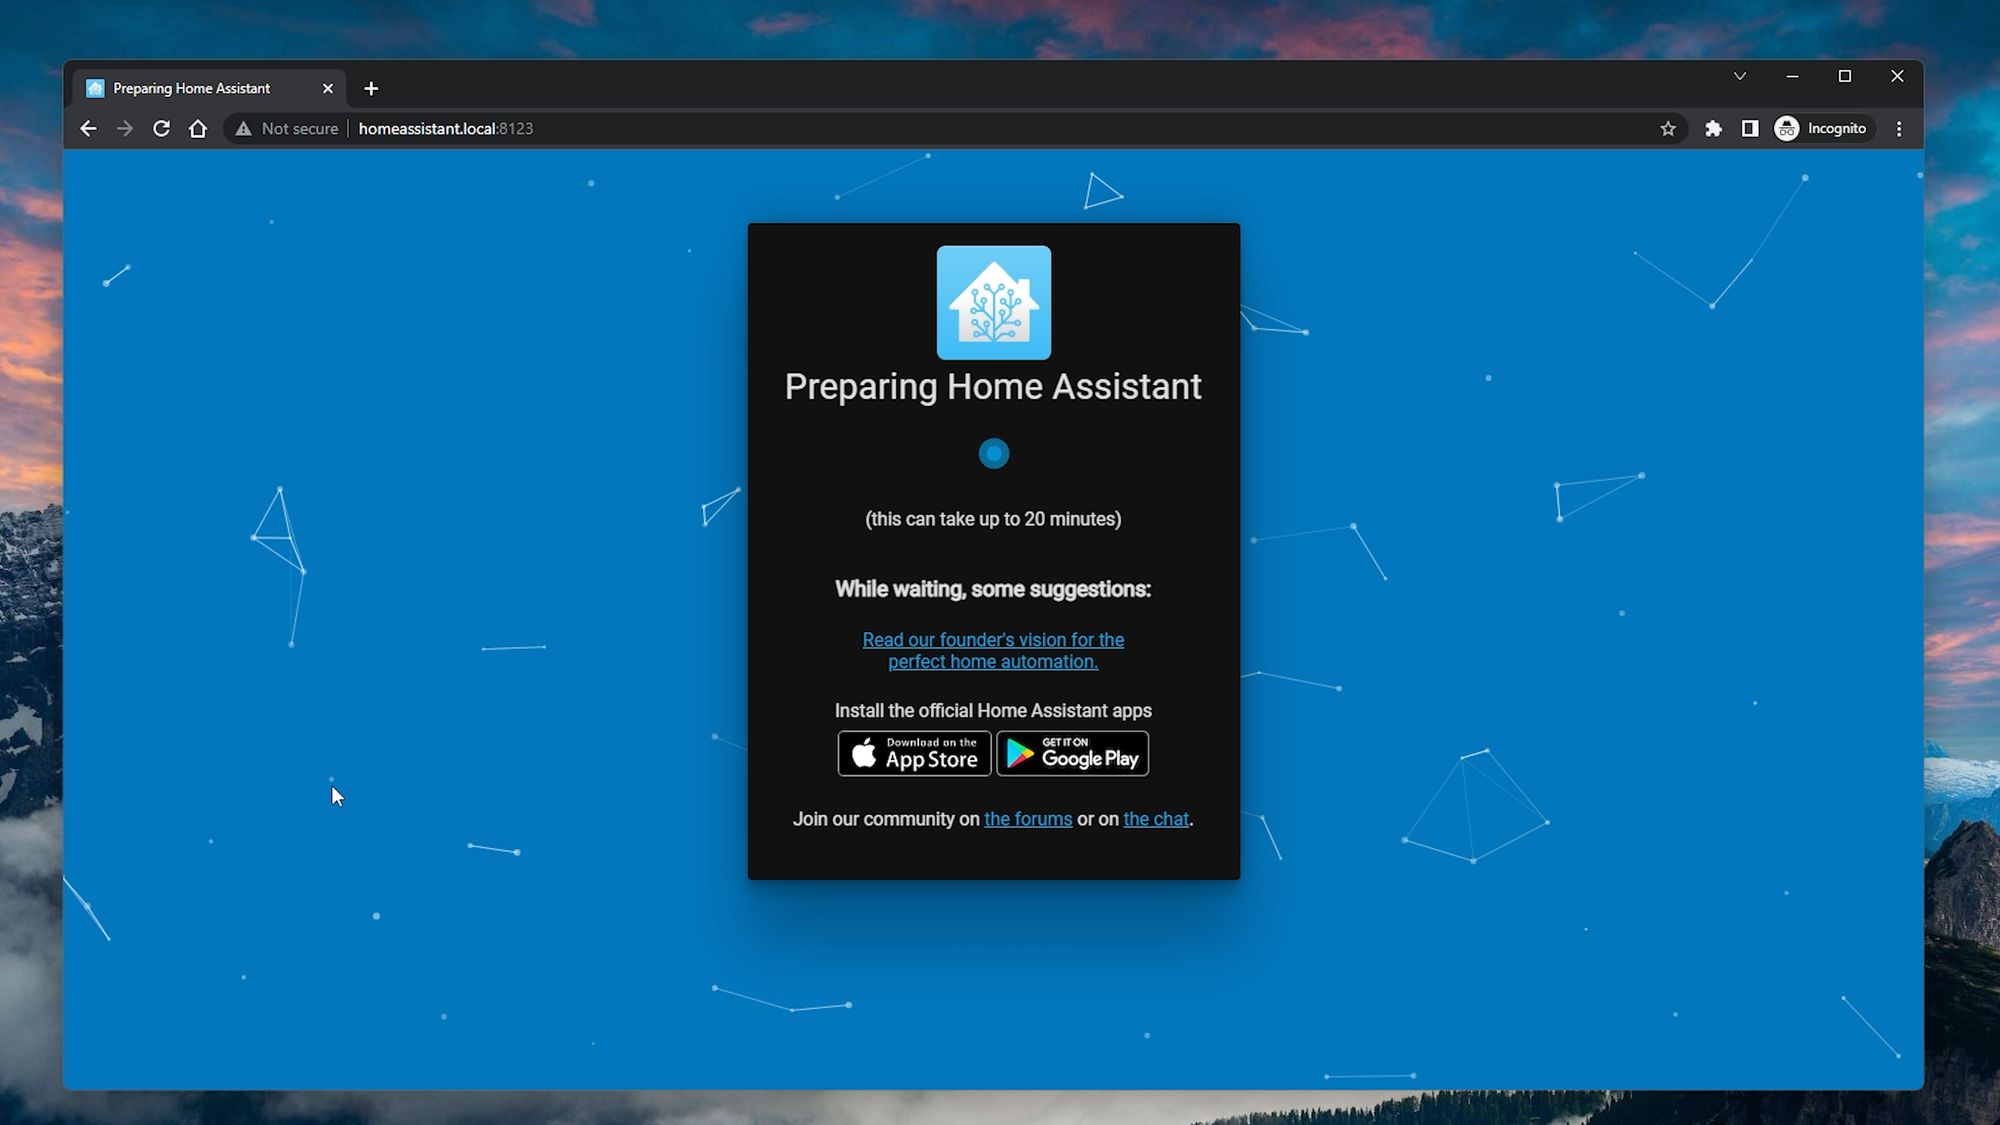 Home Assistant OS Version 10 Update